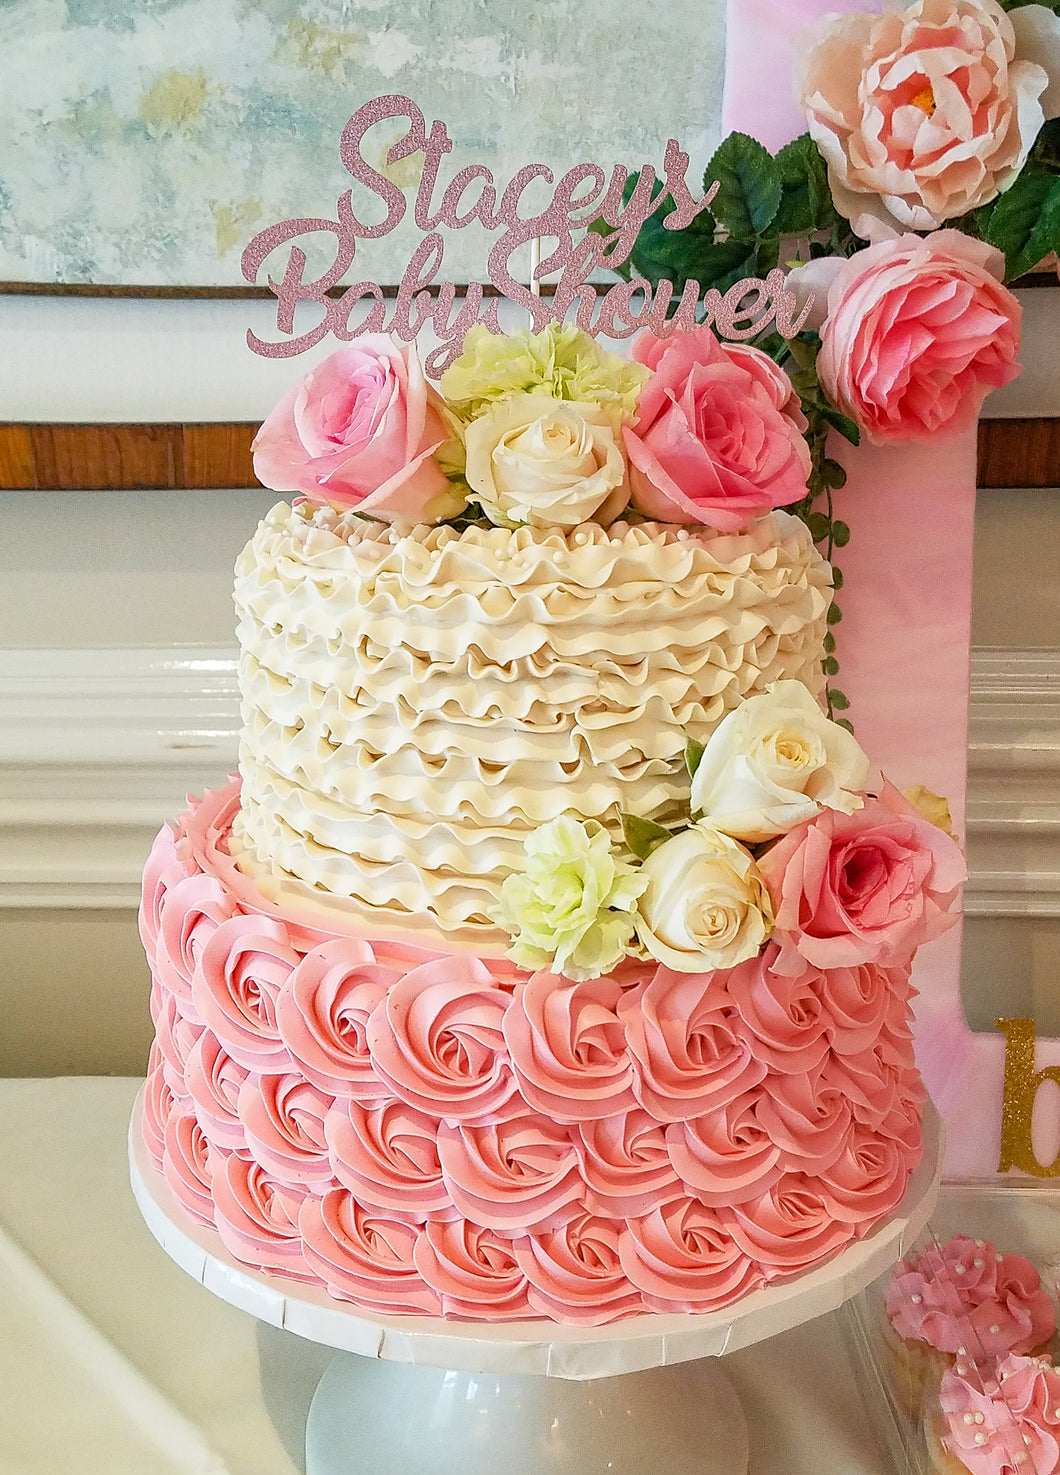 A 2 tier cake - bottom tier... - The Cake Lady Sioux Falls | Facebook